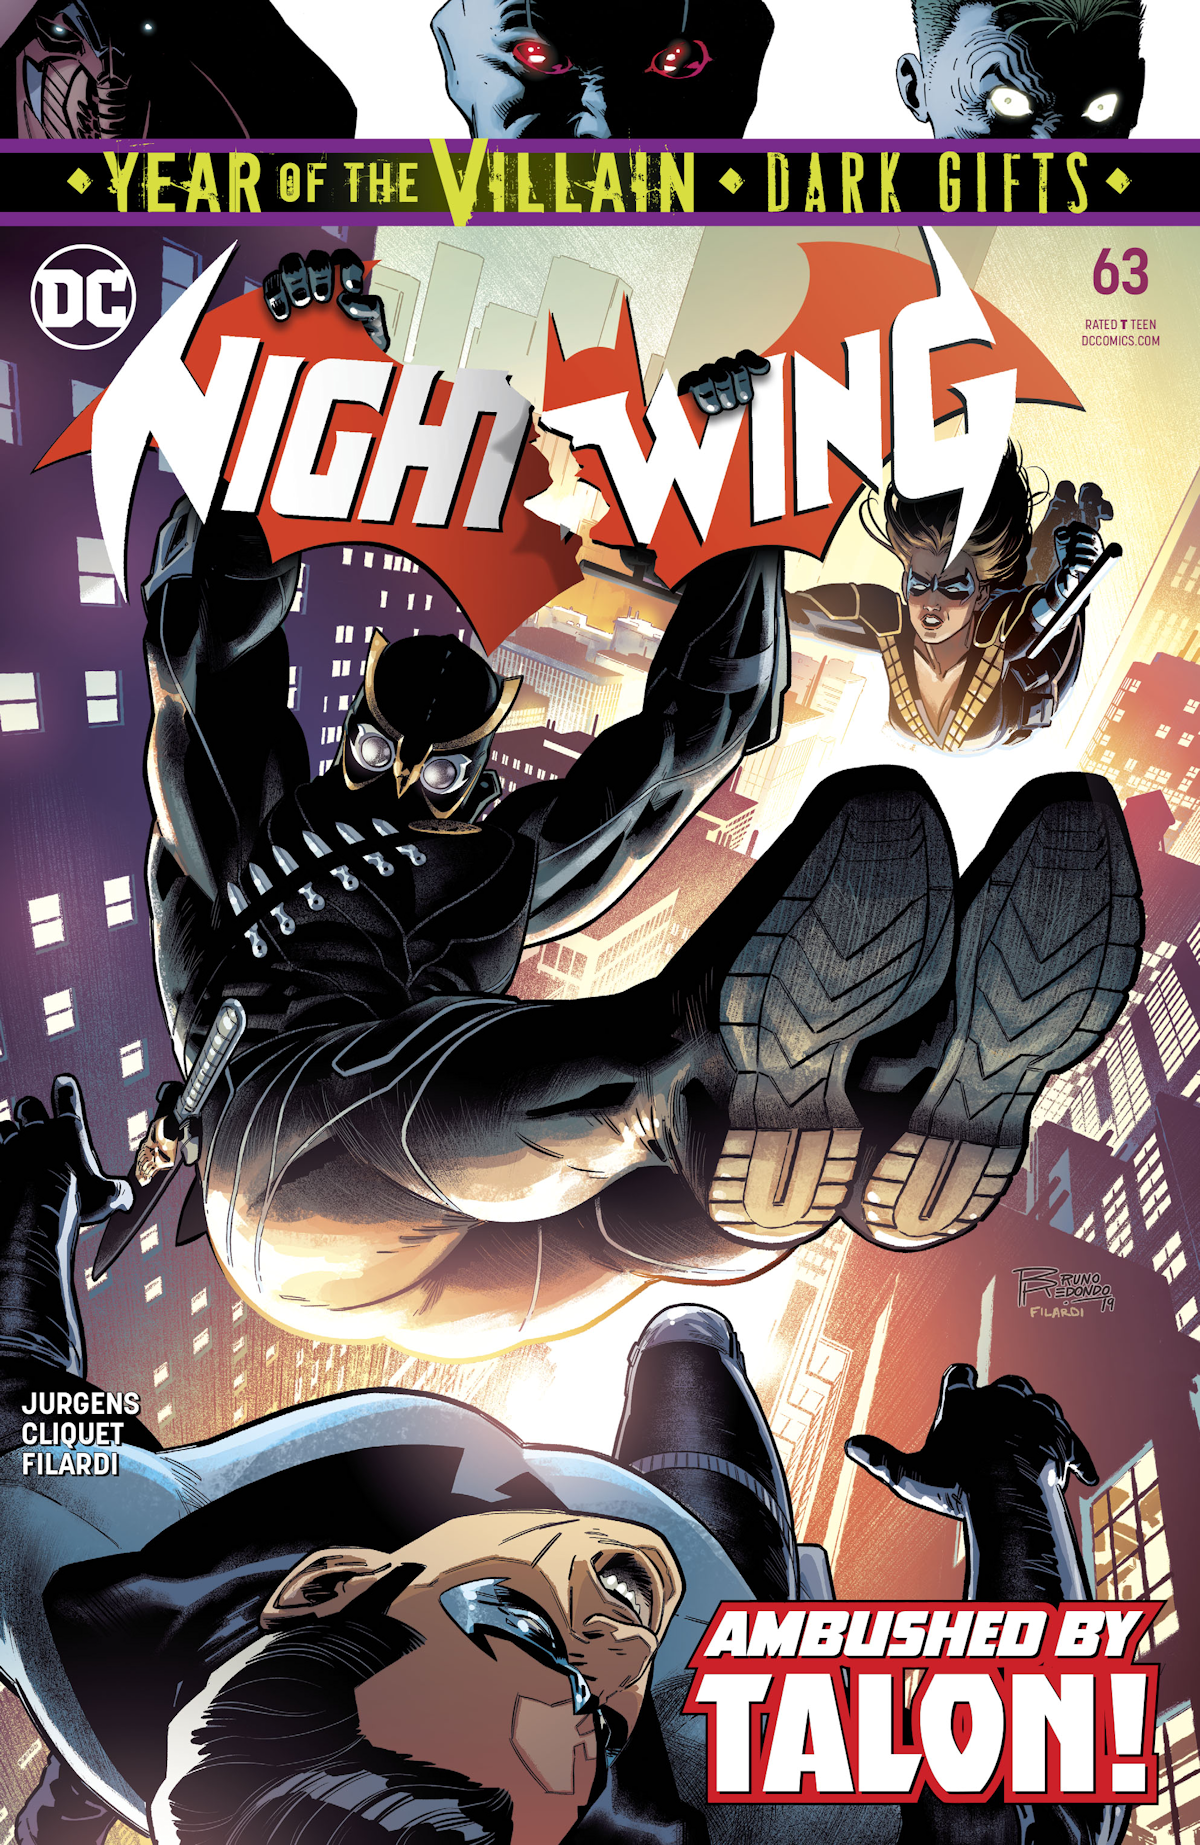 Nightwing Vol. 4 63 (Cover A)